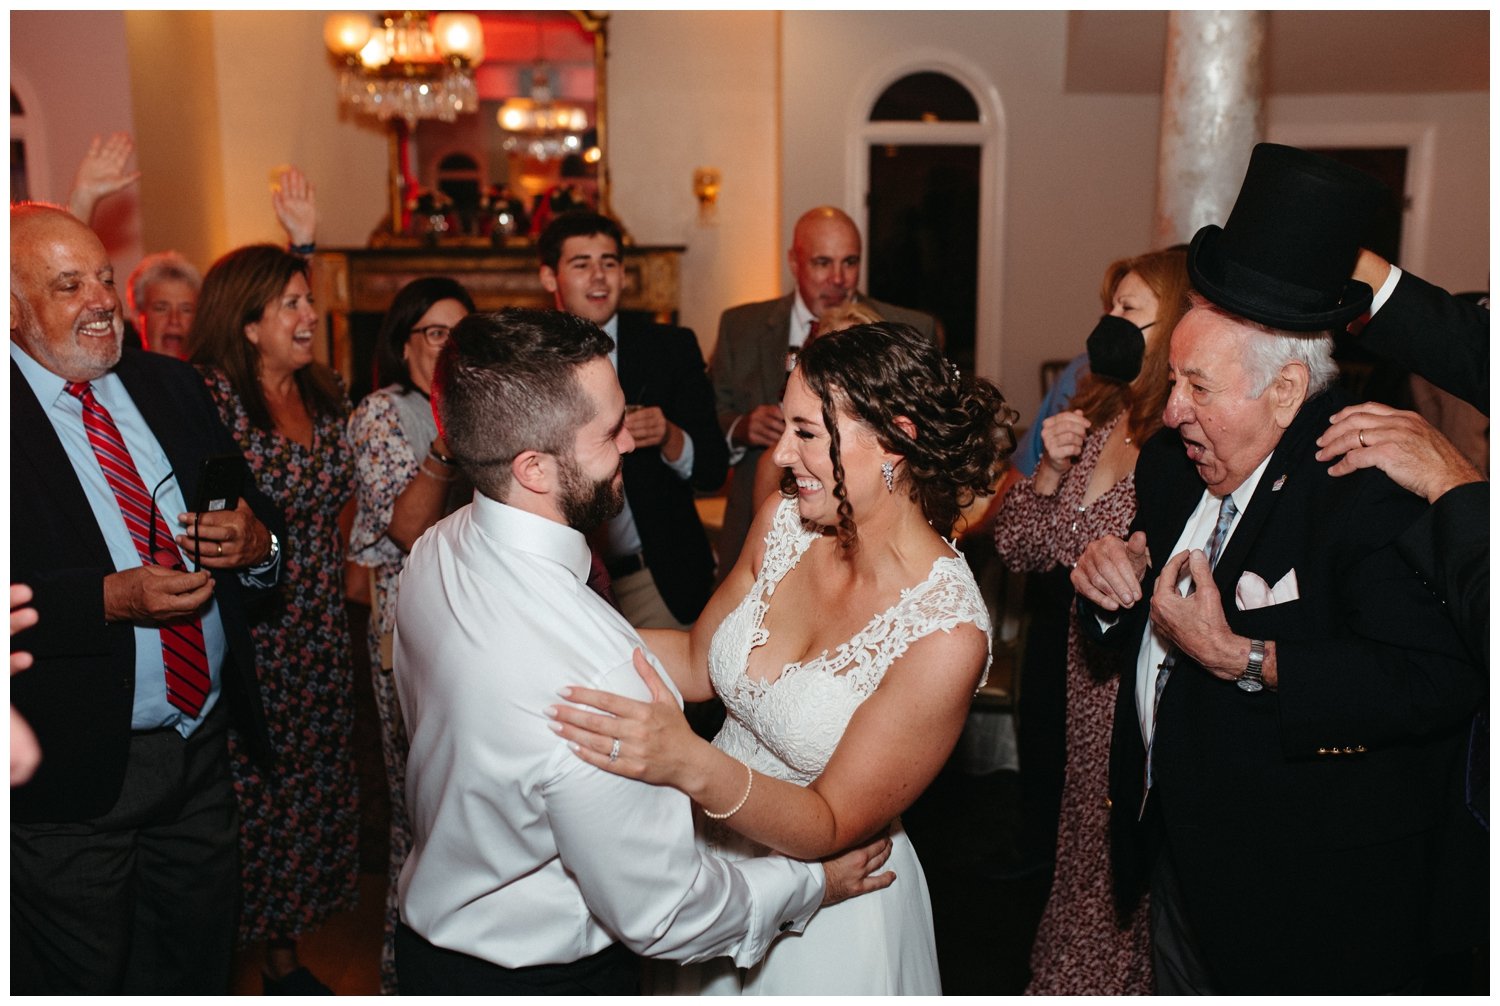 Guests join the couple on the dance floor at the intimate destination wedding